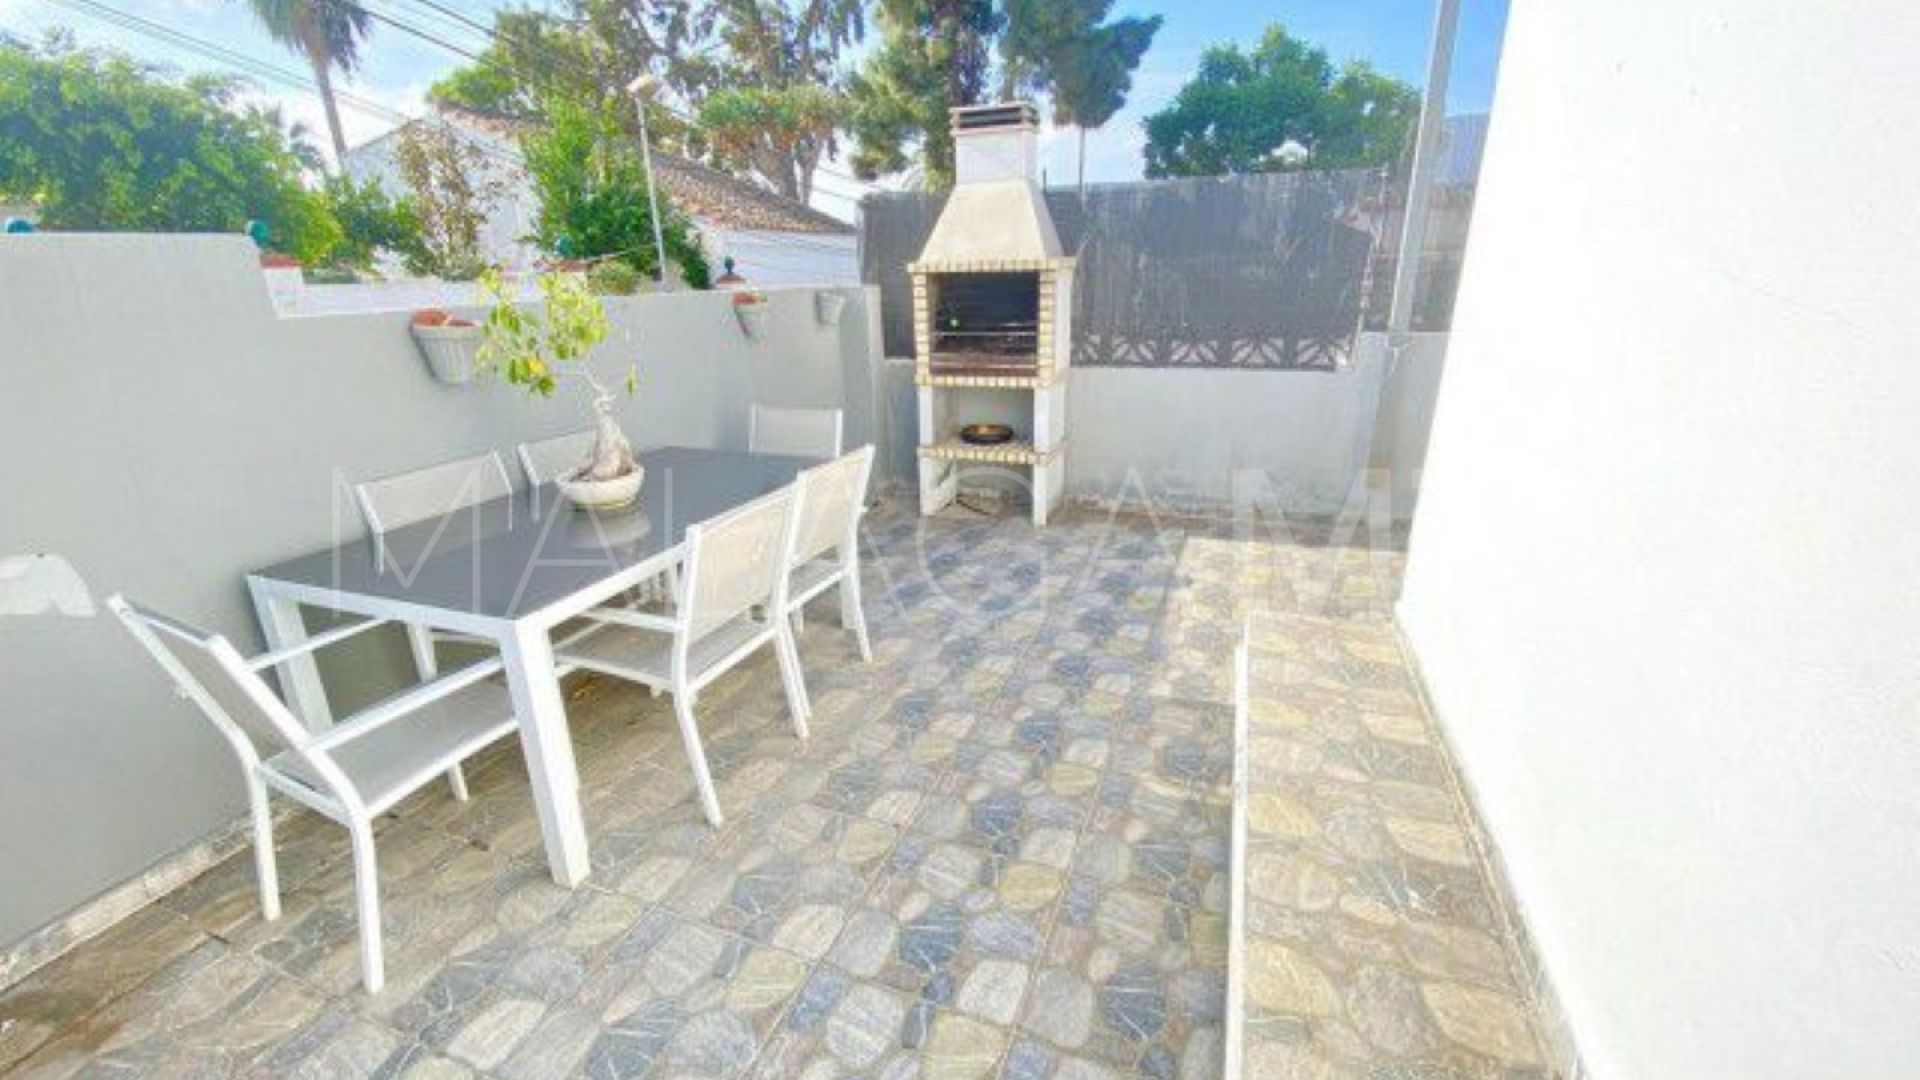 For sale house in Costabella with 3 bedrooms